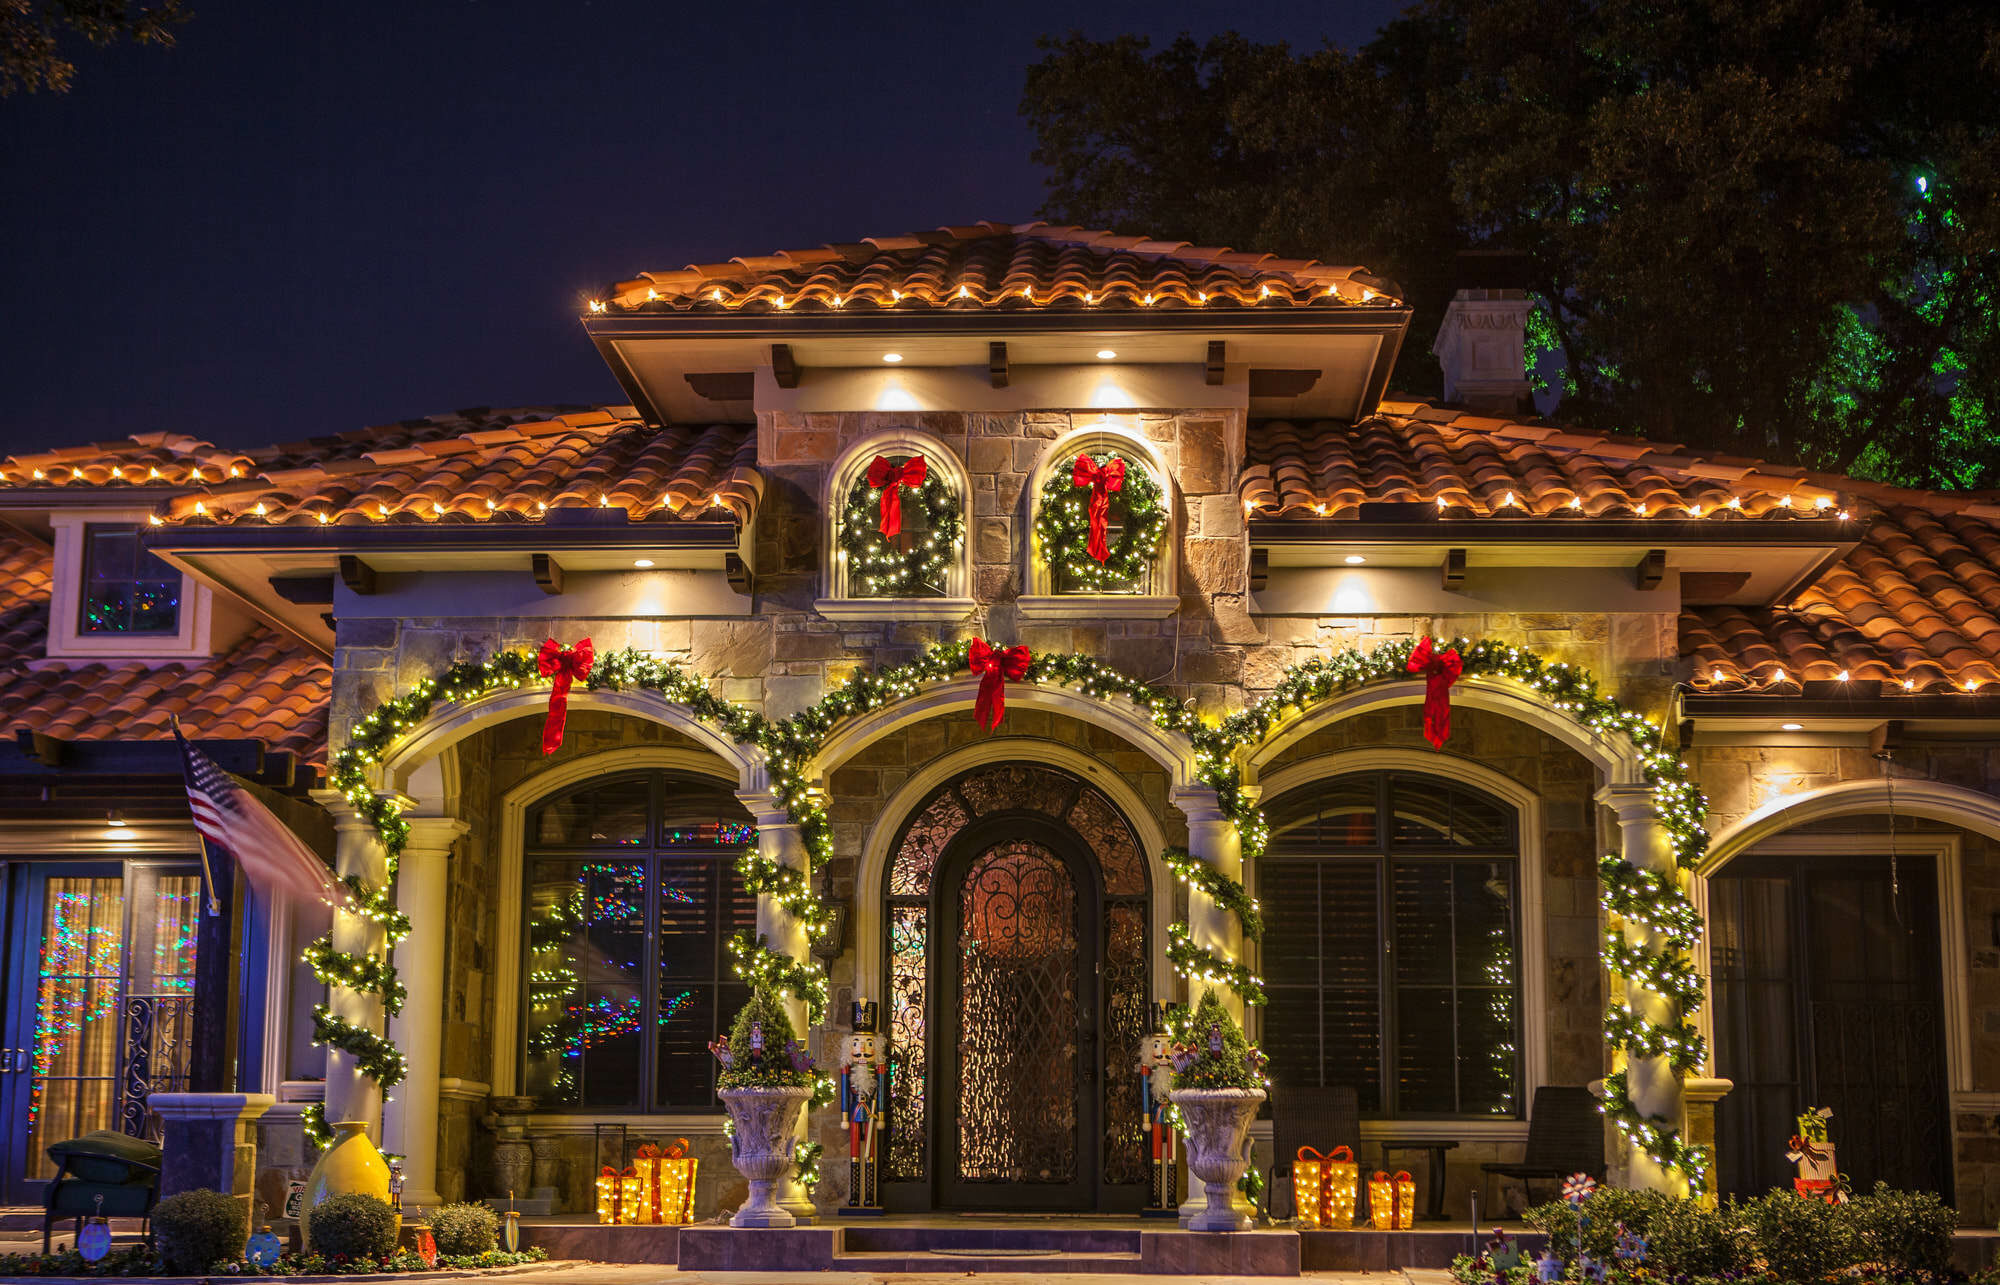 home christmas lights with garlands and decor by The Perfect Light, an Outdoor Lighting Contractor specializing in Christmas Lighting and Landscape Lighting serving the Dallas-Fort Worth, Austin, Houston, and San Antonio Metroplexes.